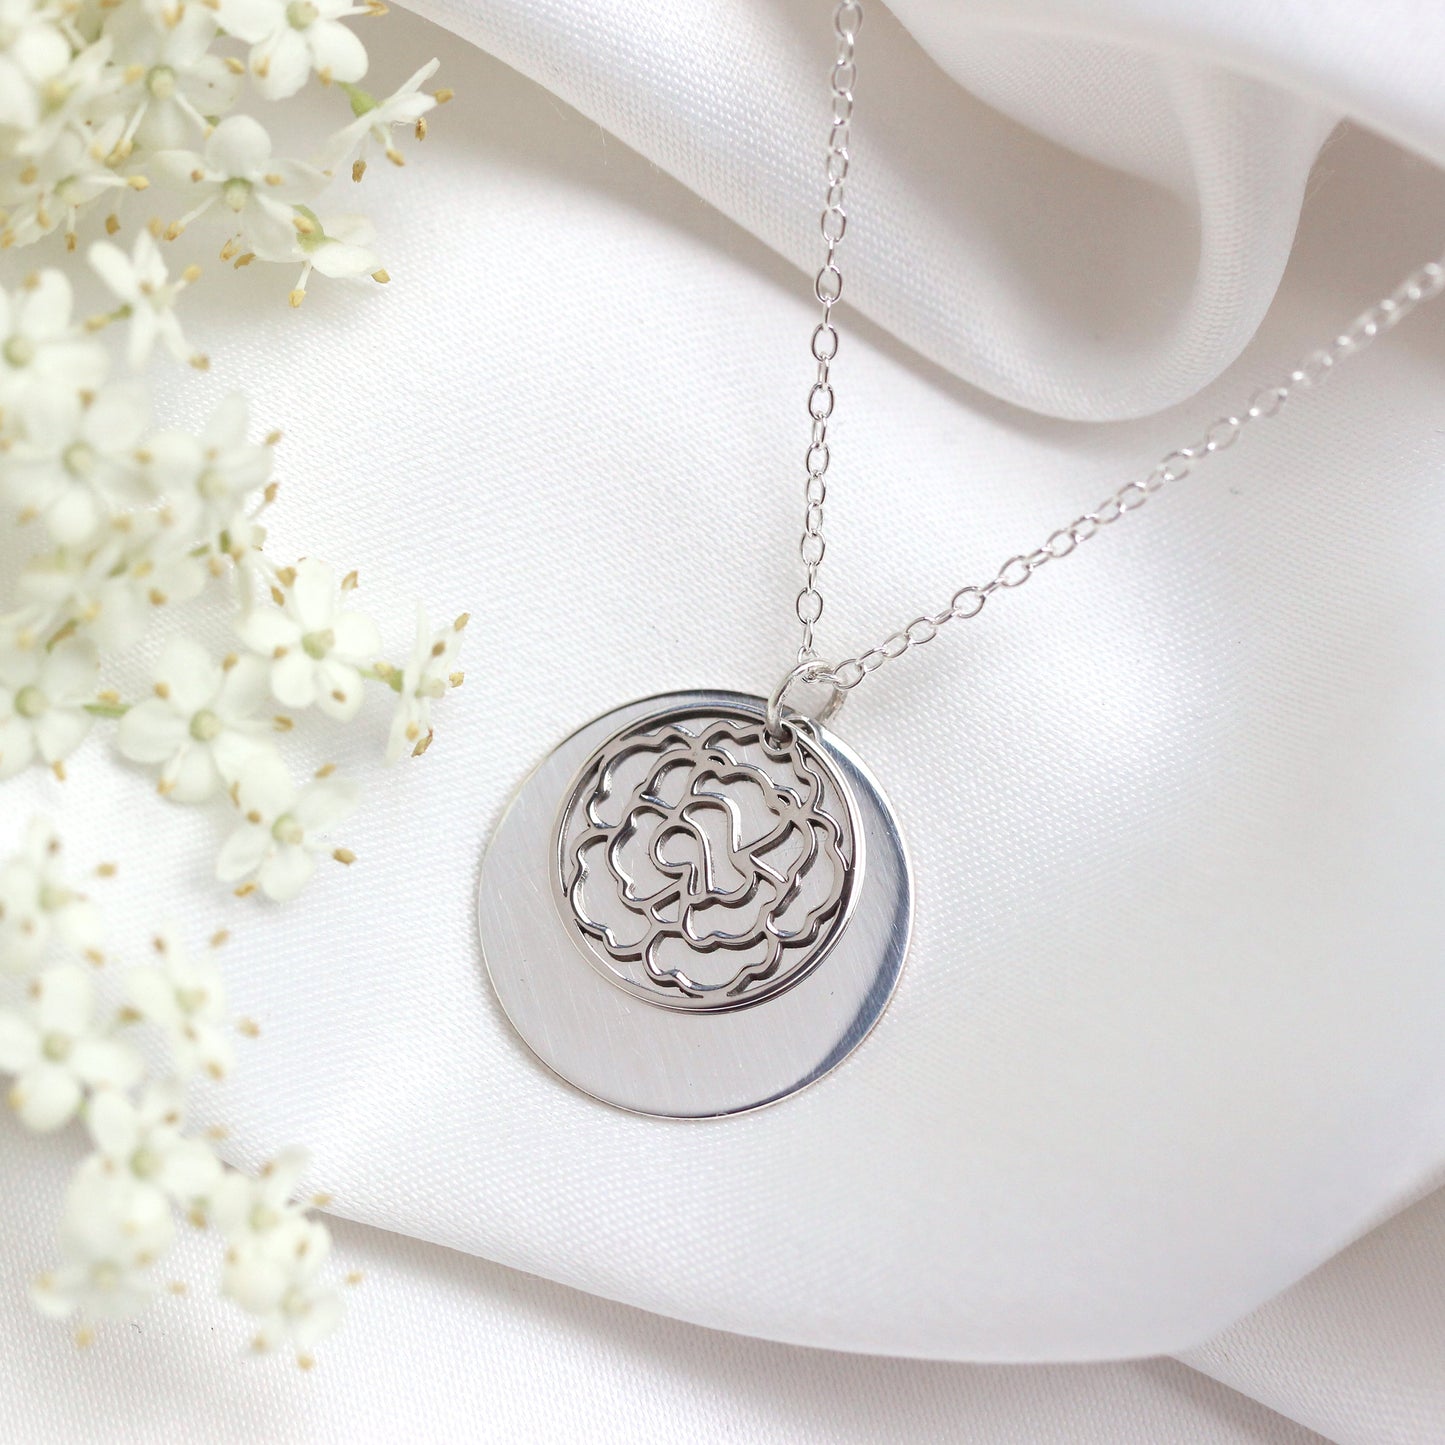 Sterling Silver January Carnation Birth Flower & 18mm Engravable Tag Necklace 14 - 22 Inches